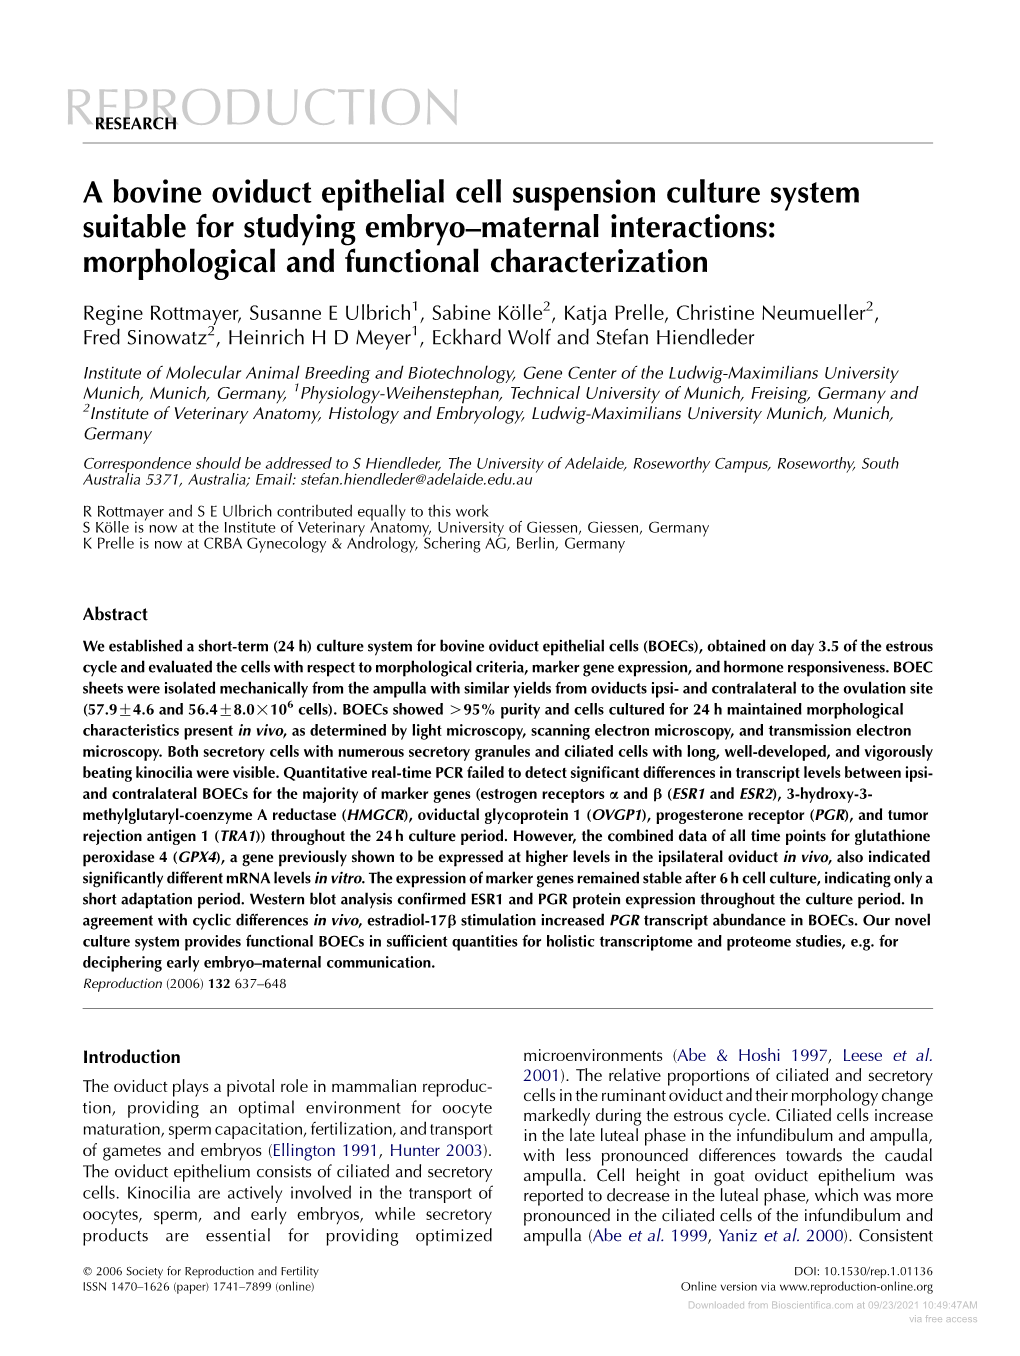 A Bovine Oviduct Epithelial Cell Suspension Culture System Suitable for Studying Embryo–Maternal Interactions: Morphological and Functional Characterization